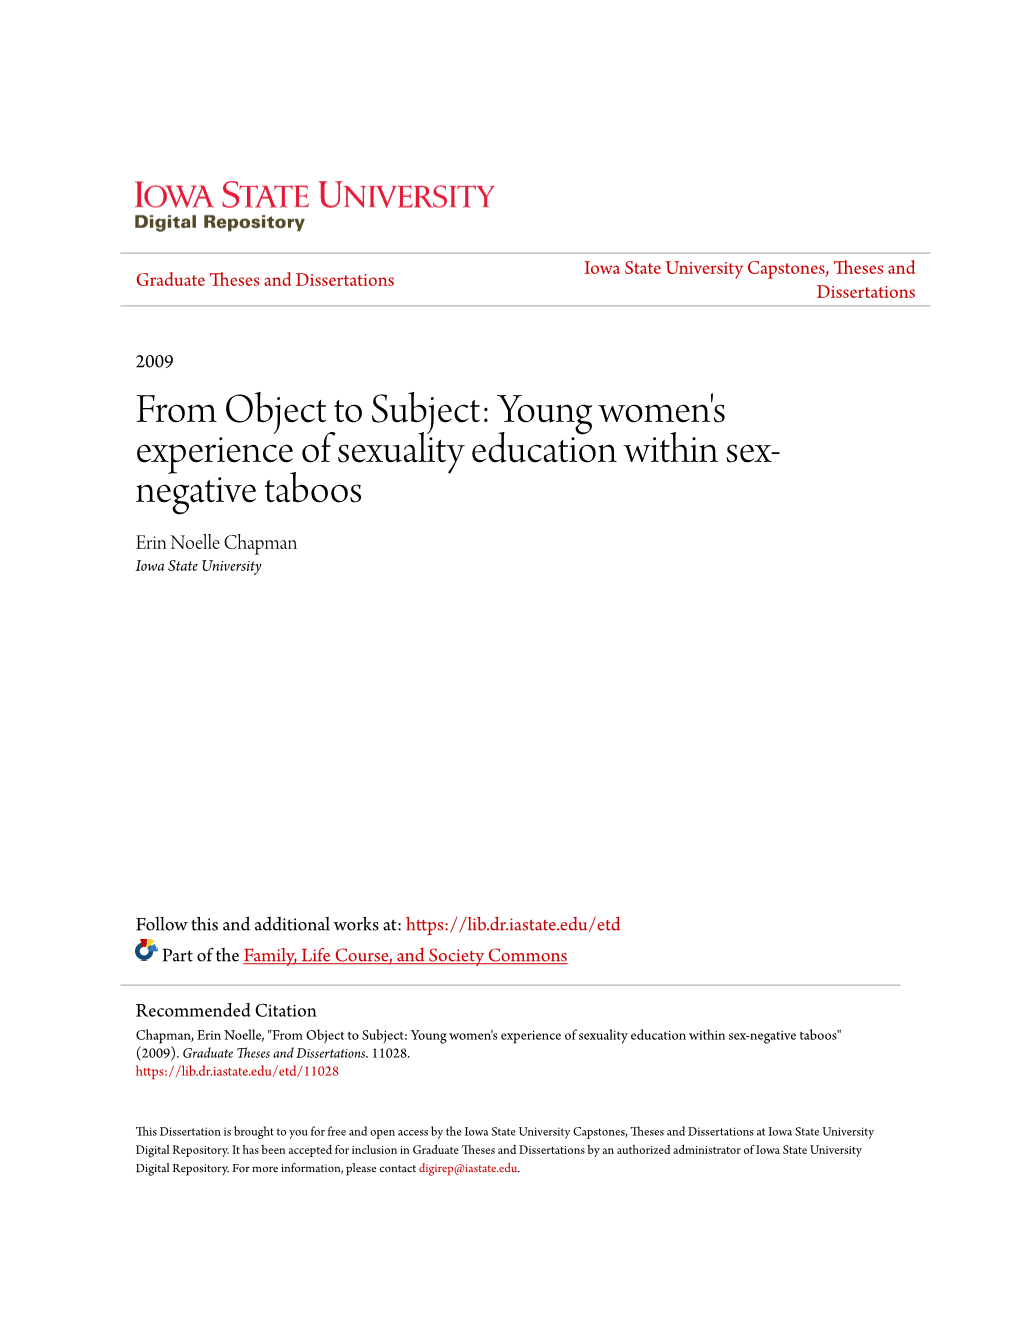 Young Women's Experience of Sexuality Education Within Sex- Negative Taboos Erin Noelle Chapman Iowa State University